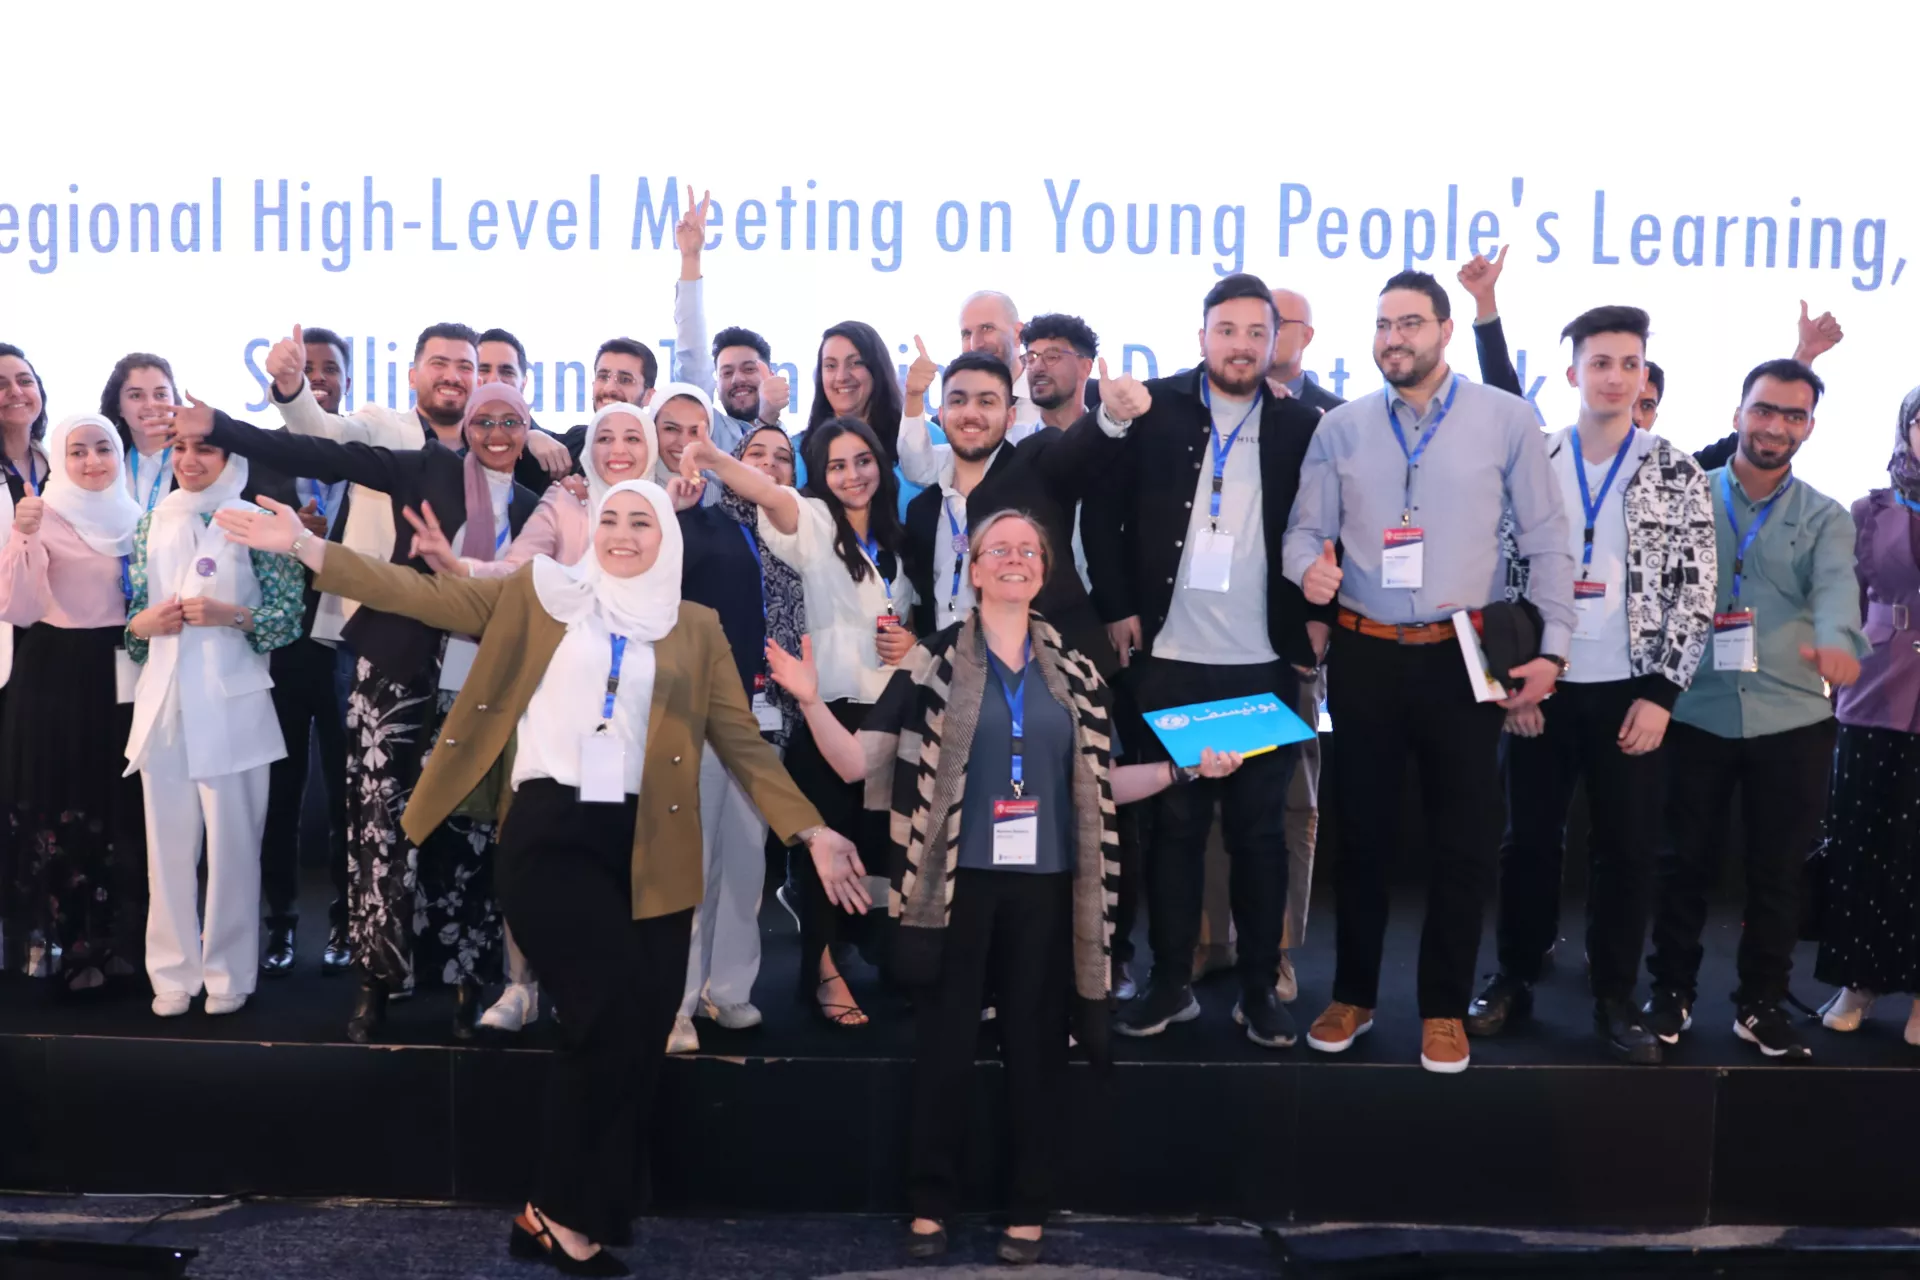 Participants of Regional High-Level Meeting on Young People’s Learning, Skilling and Transition to Decent Work pose on stage